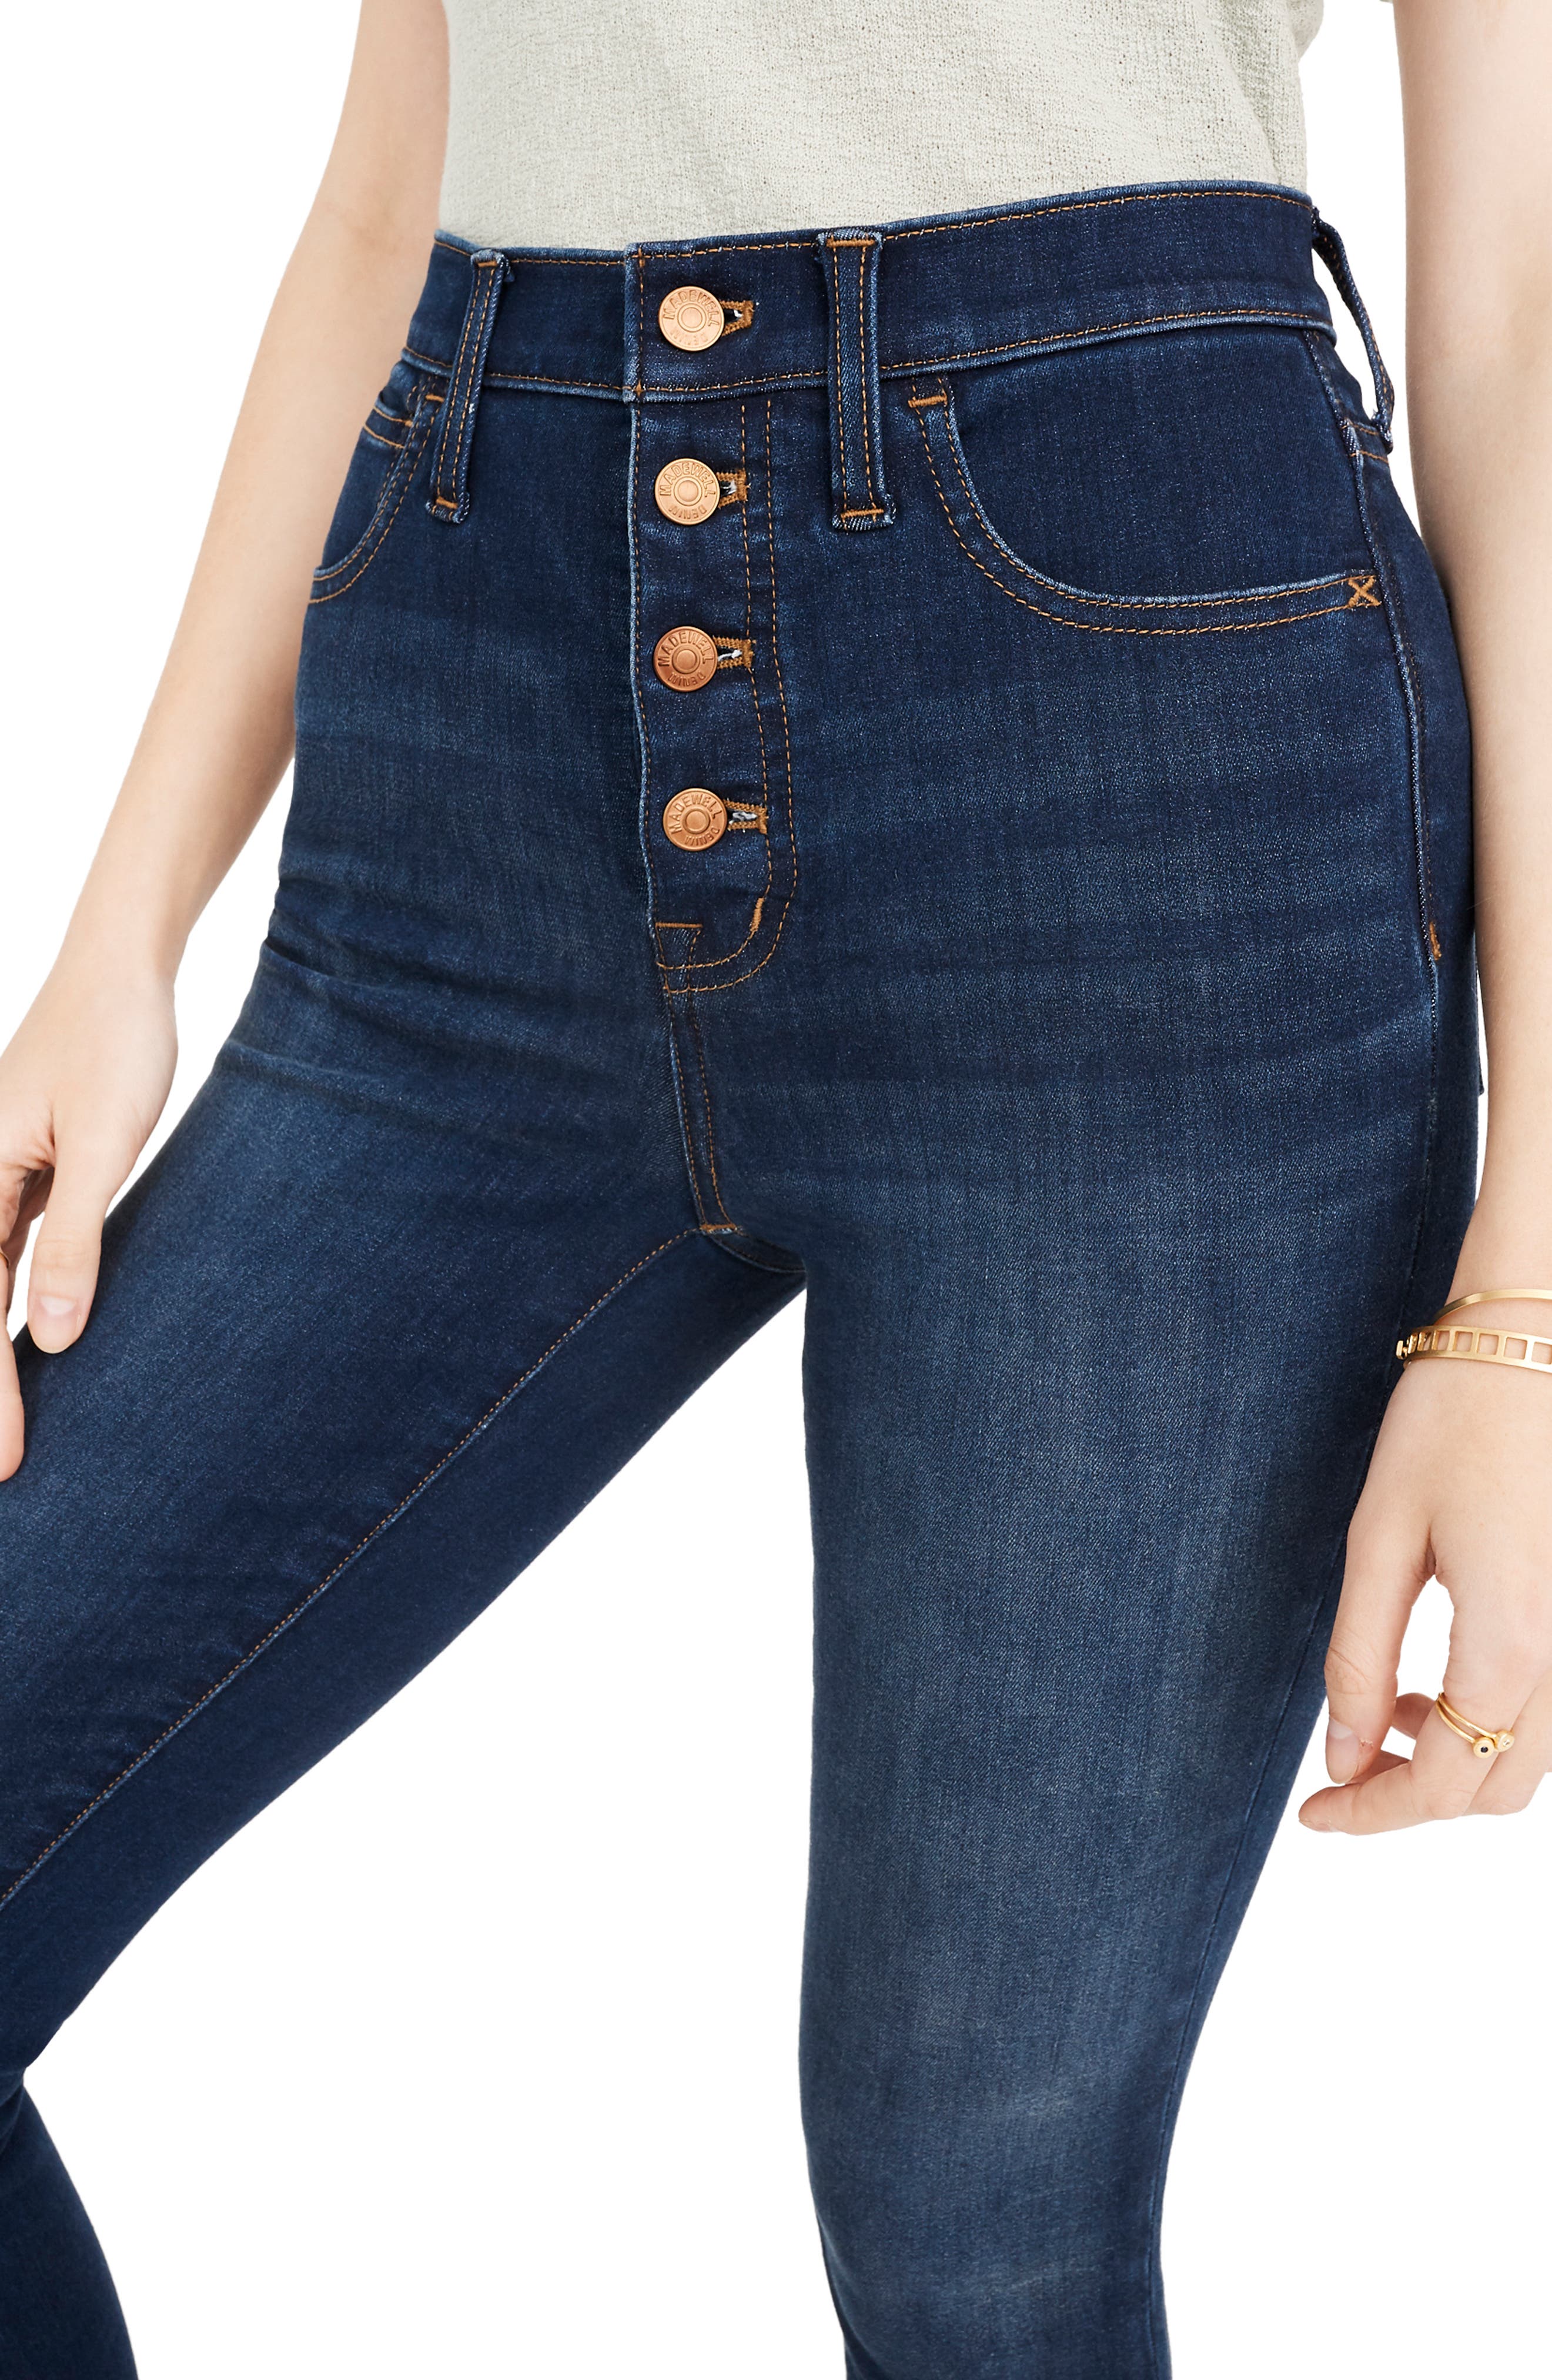 madewell cassia jeans